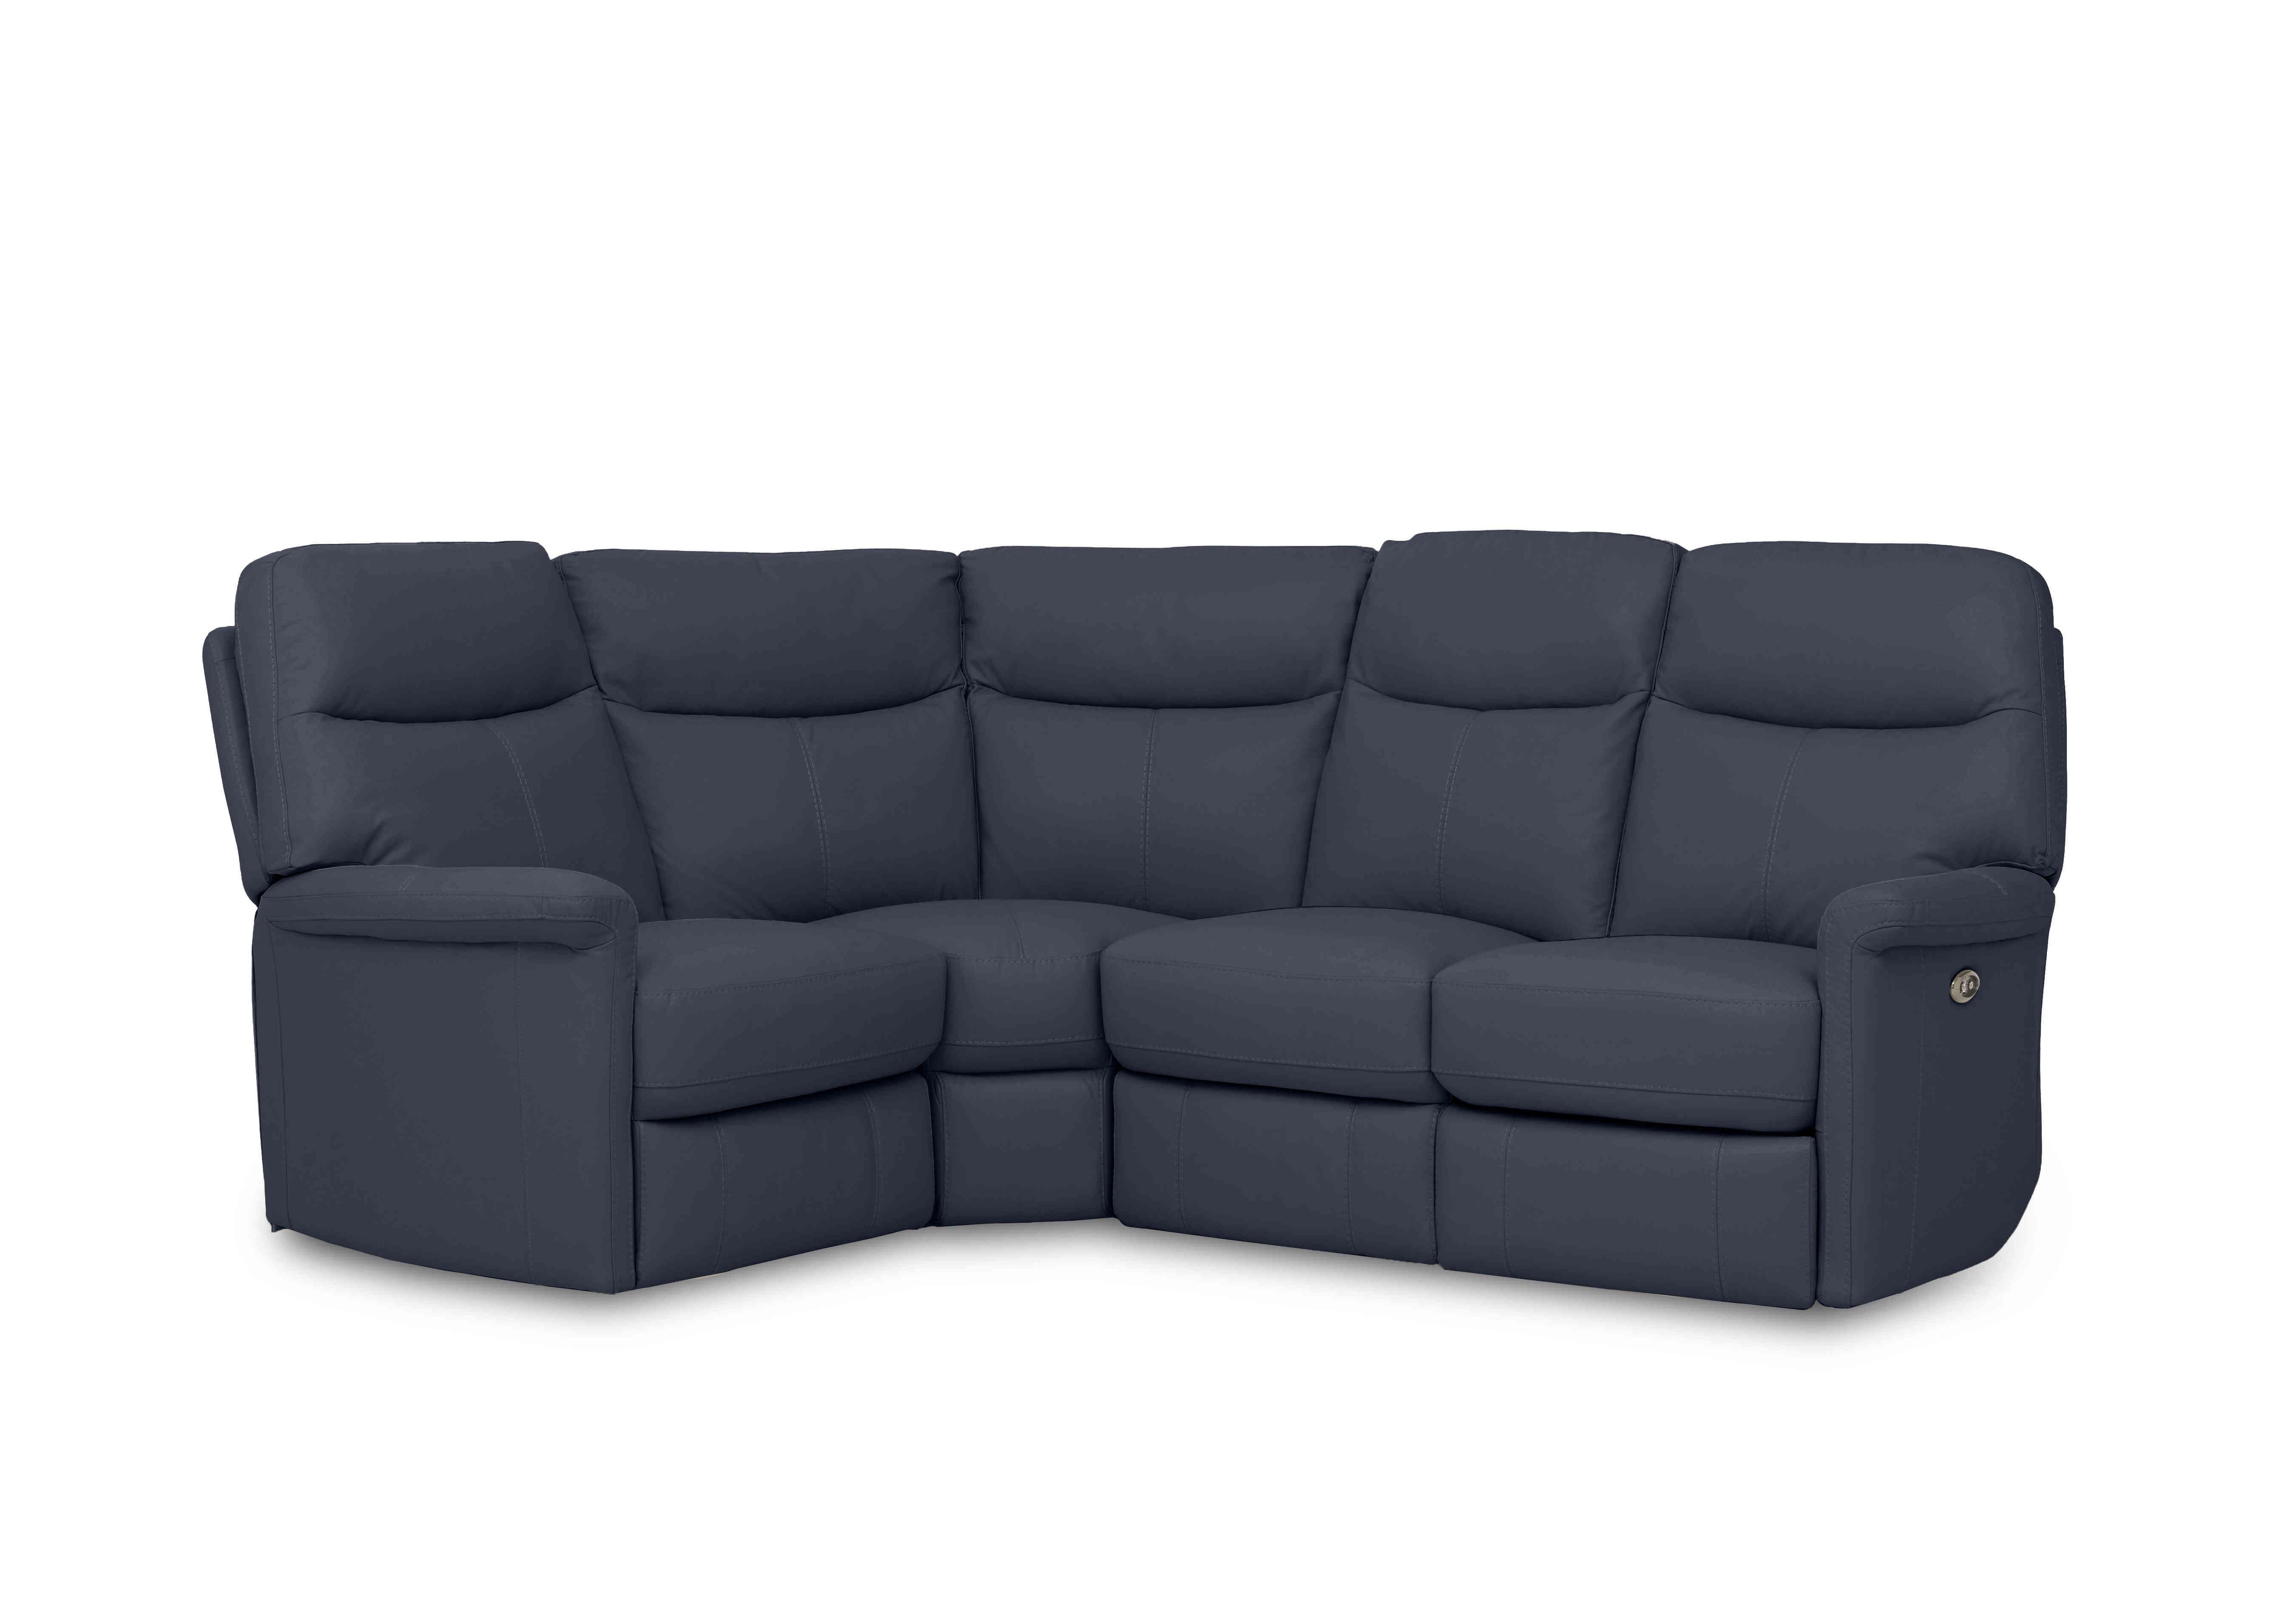 Compact Collection Lille Leather Corner Sofa in Bv-313e Ocean Blue on Furniture Village